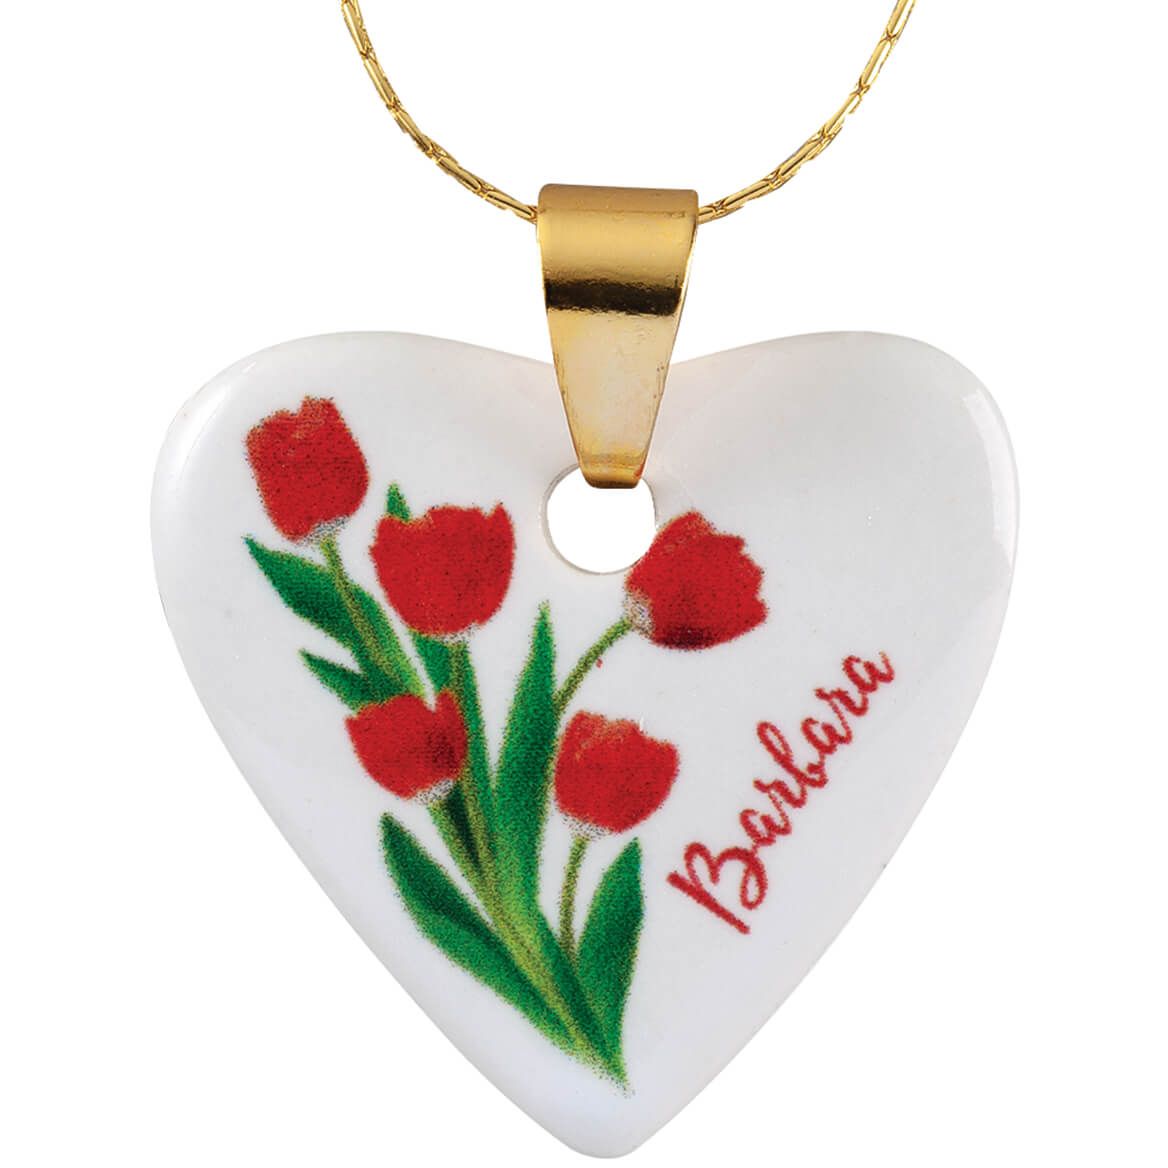 Personalized From The Heart Pendant + '-' + 375644